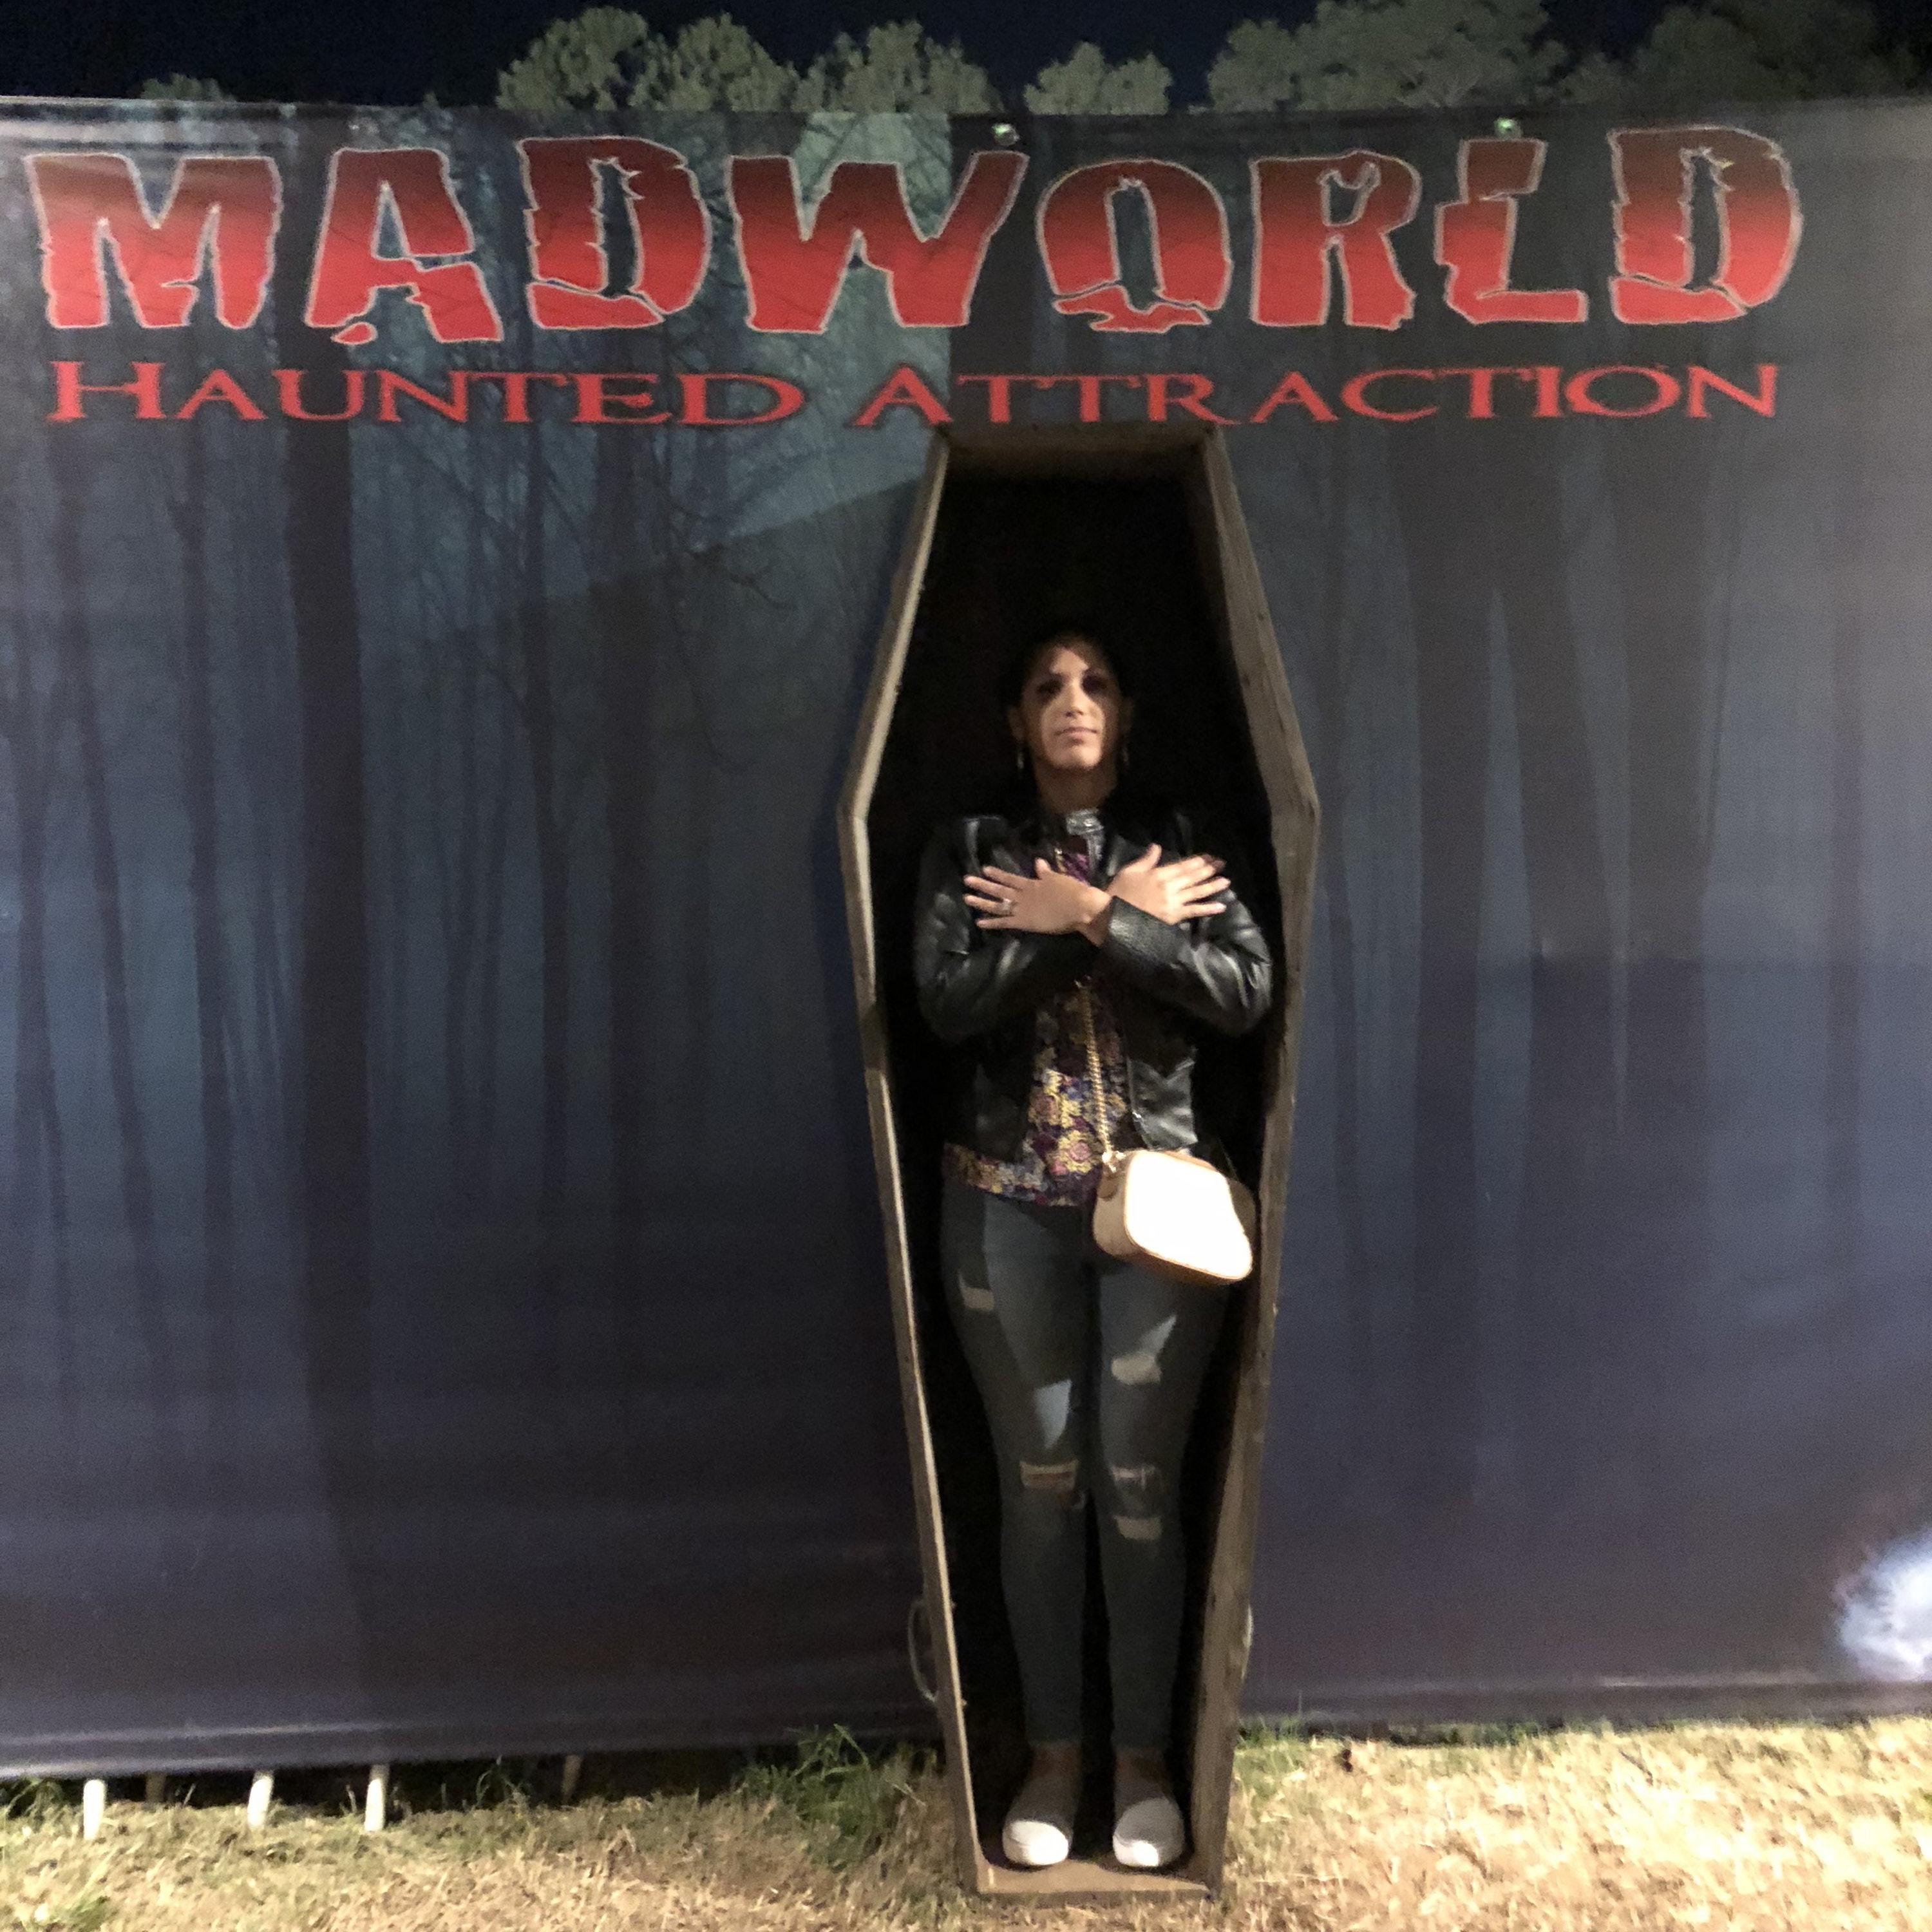 Check out MADWORLD Haunted Attraction for a scary good time